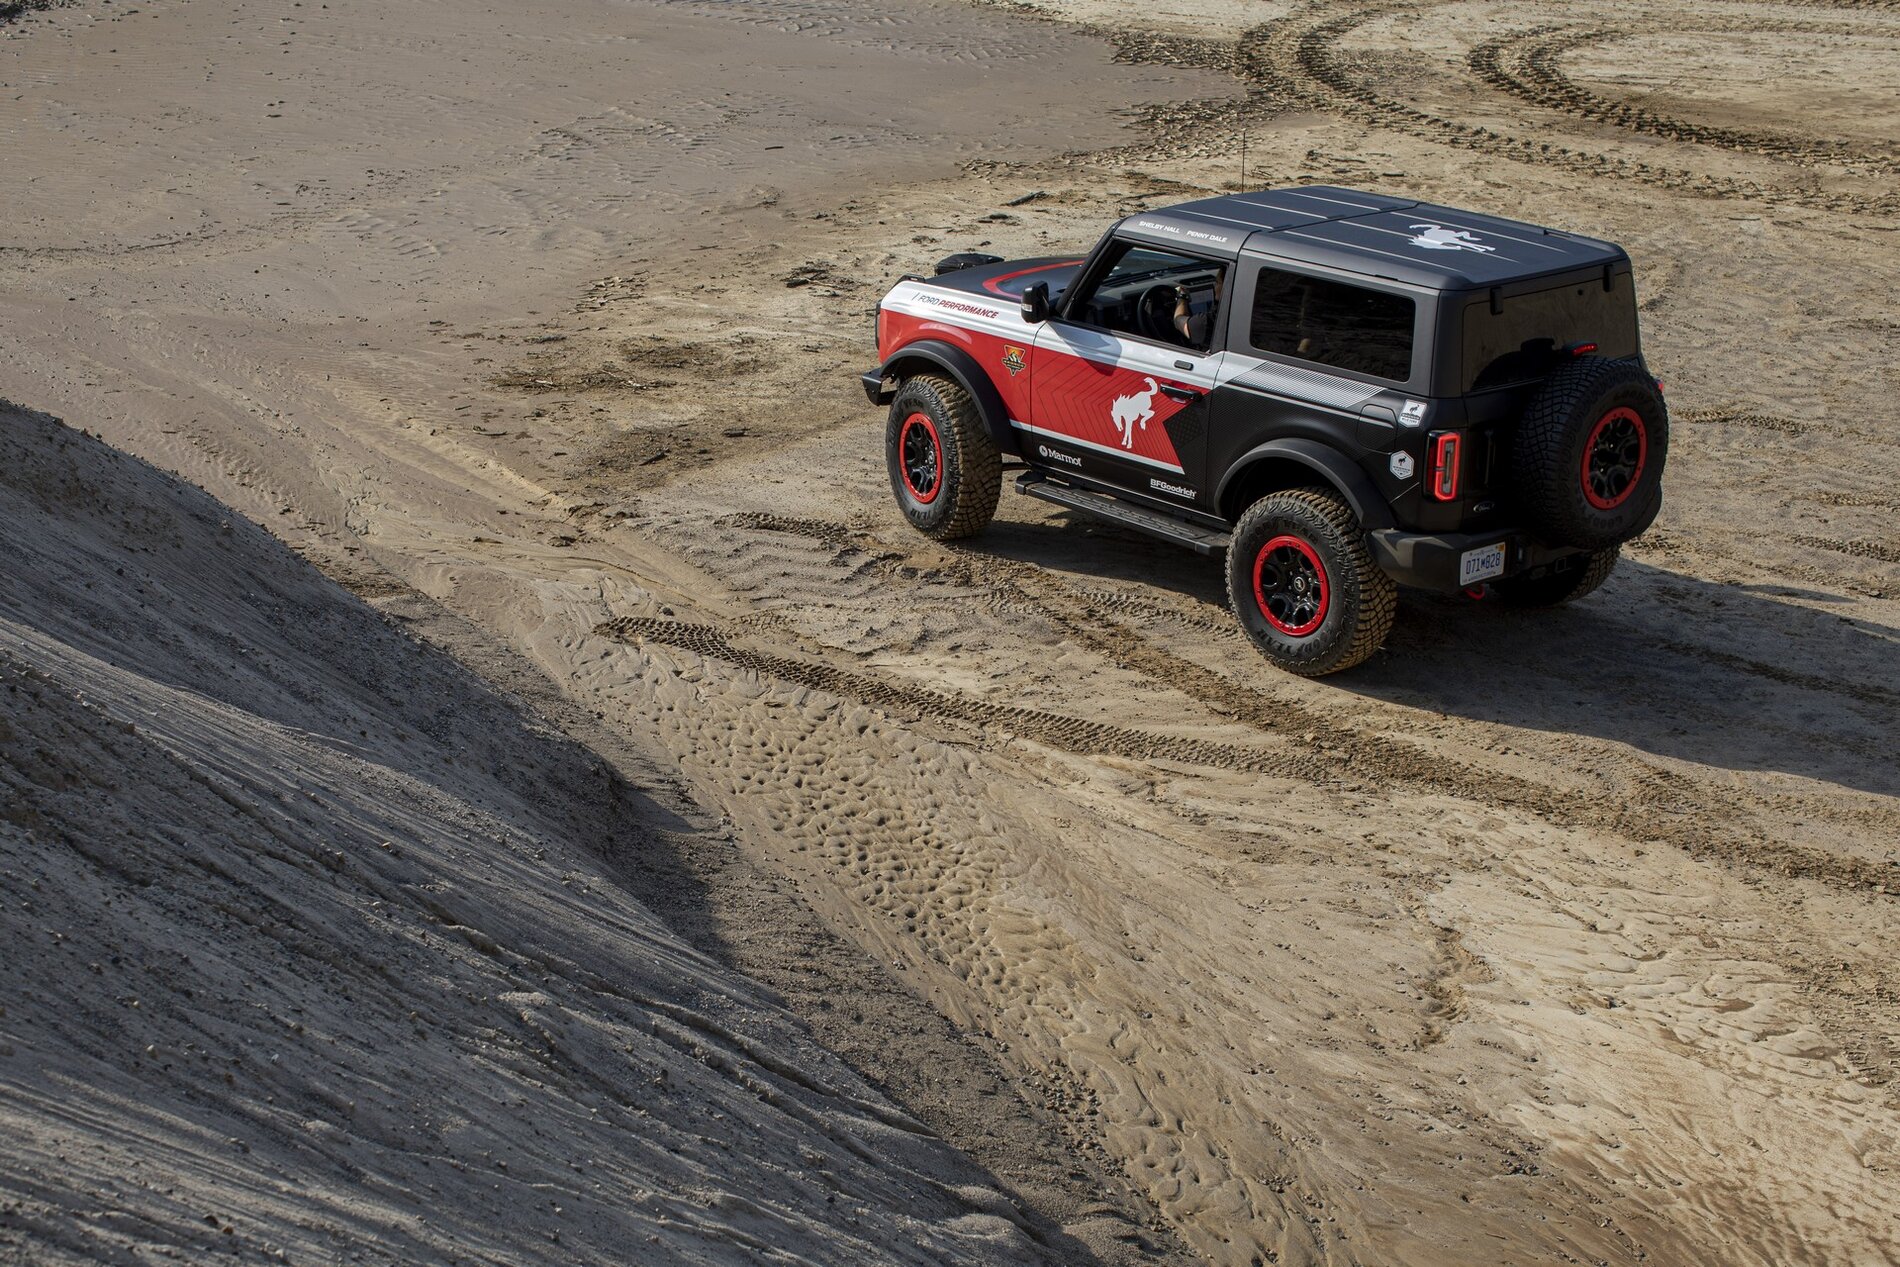 Ford Bronco 3 Bronco Teams Will Compete in 2022 Rebelle Rally ford-bronco-rebelle-rally-37-jpg-